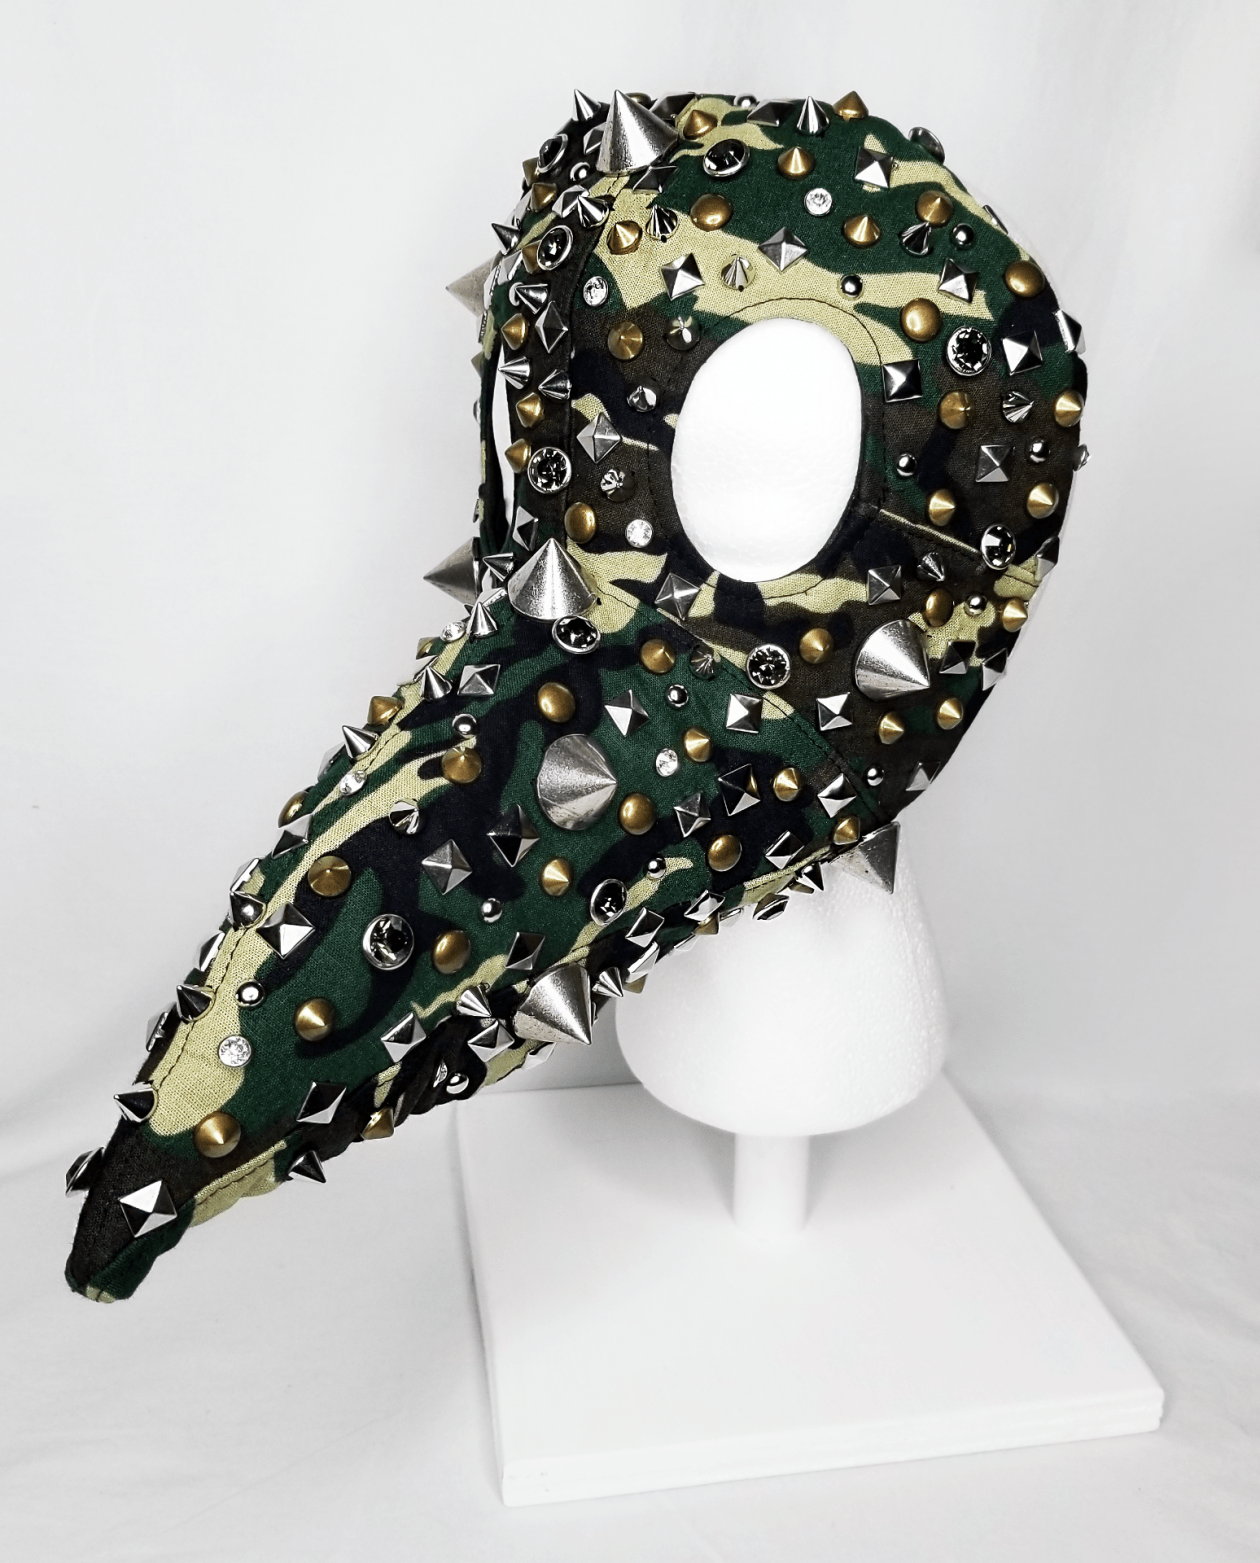 A beaked mask in camouflage covered in studs